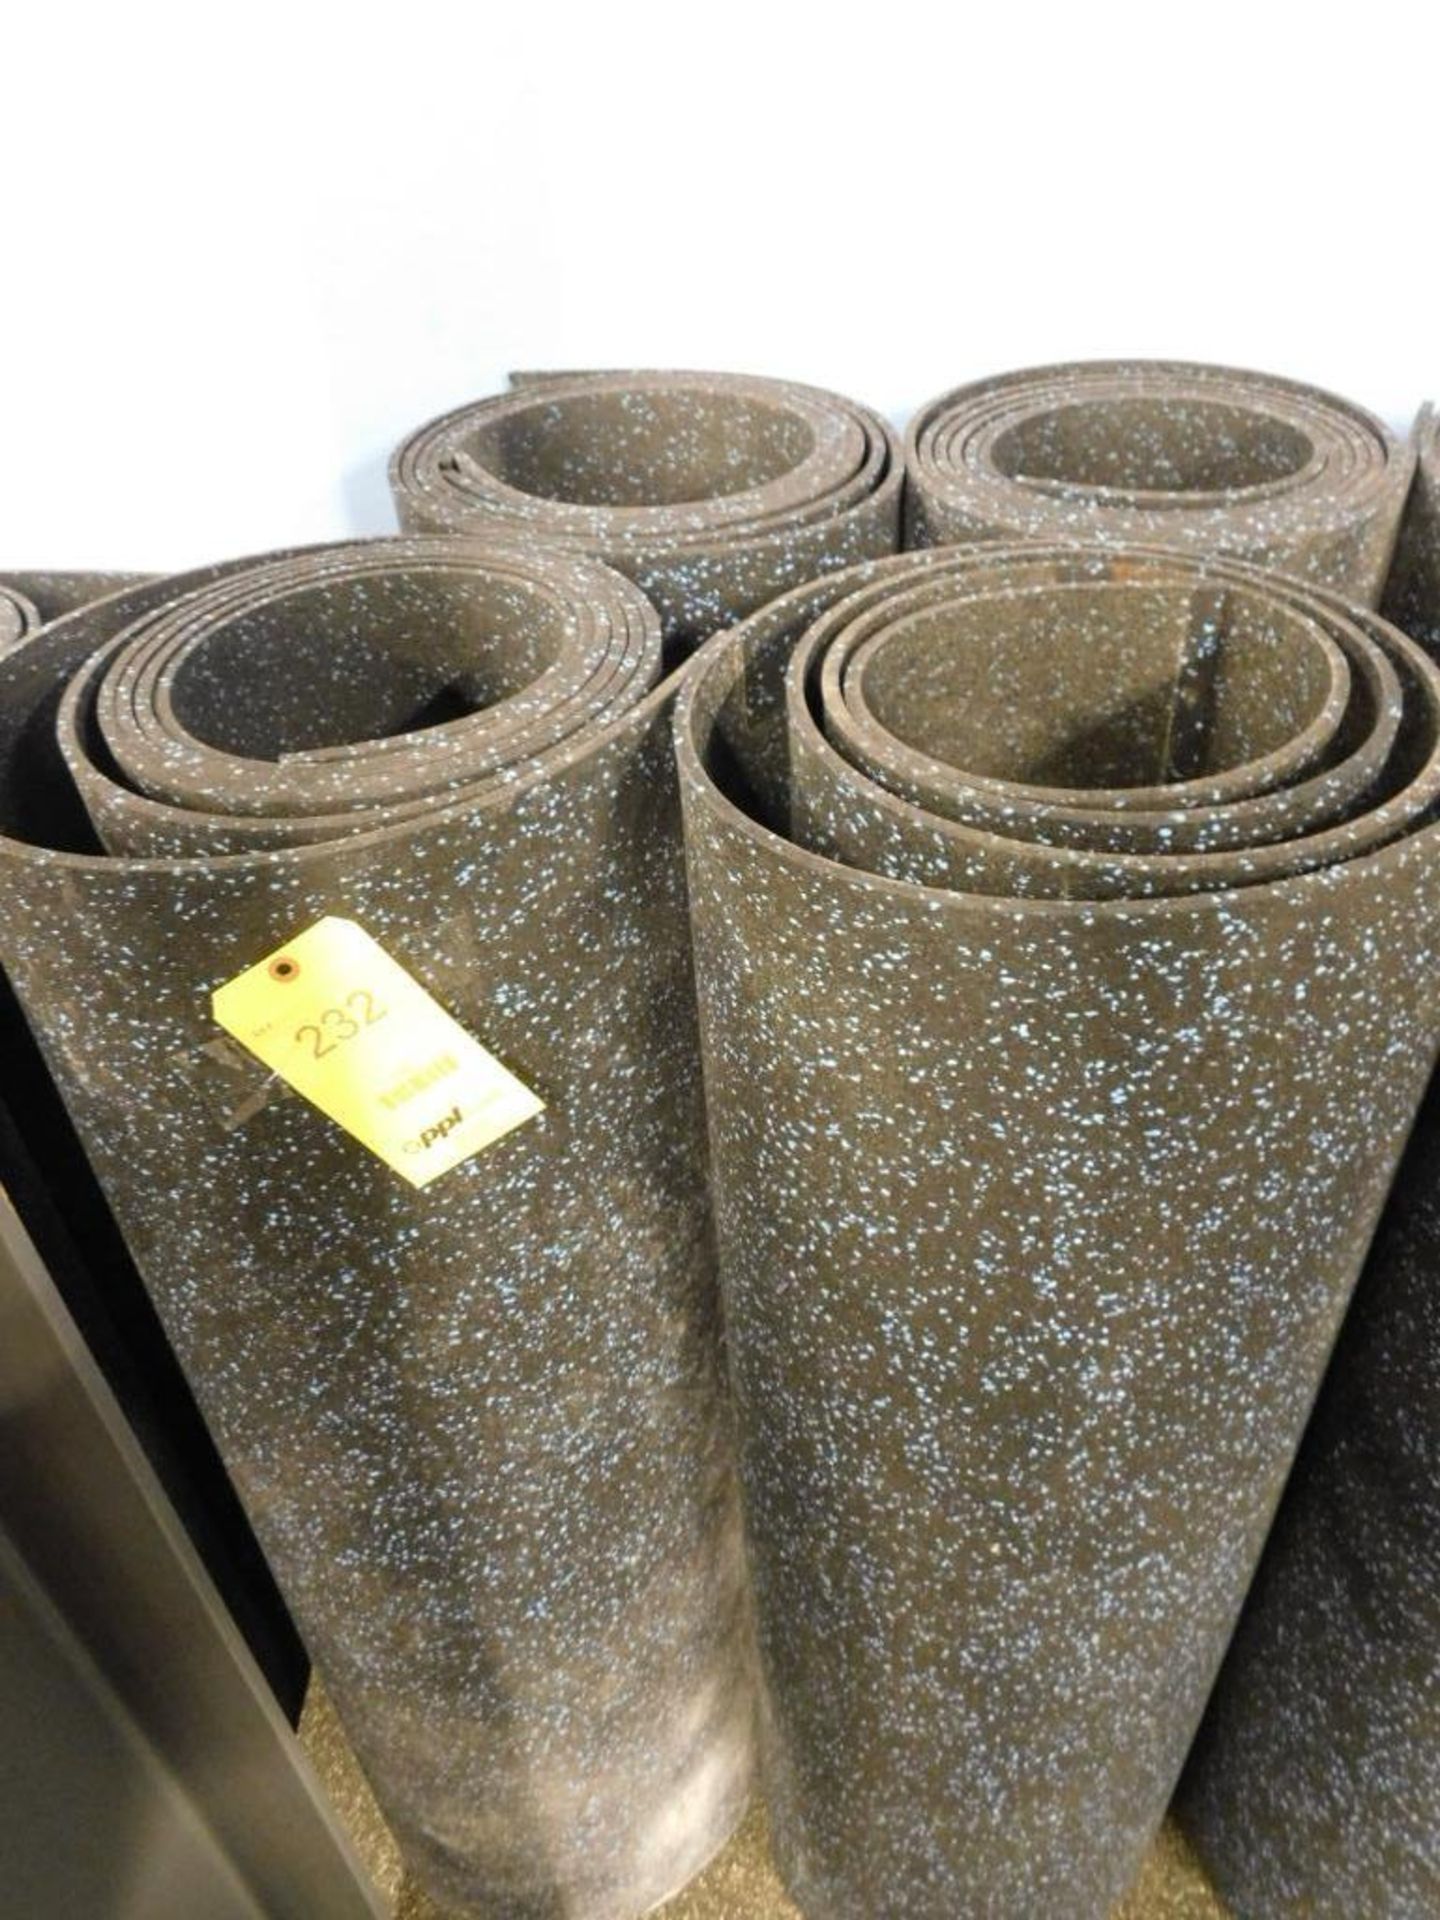 LOT: (4) Rolls of Rubber Snap Together Flooring